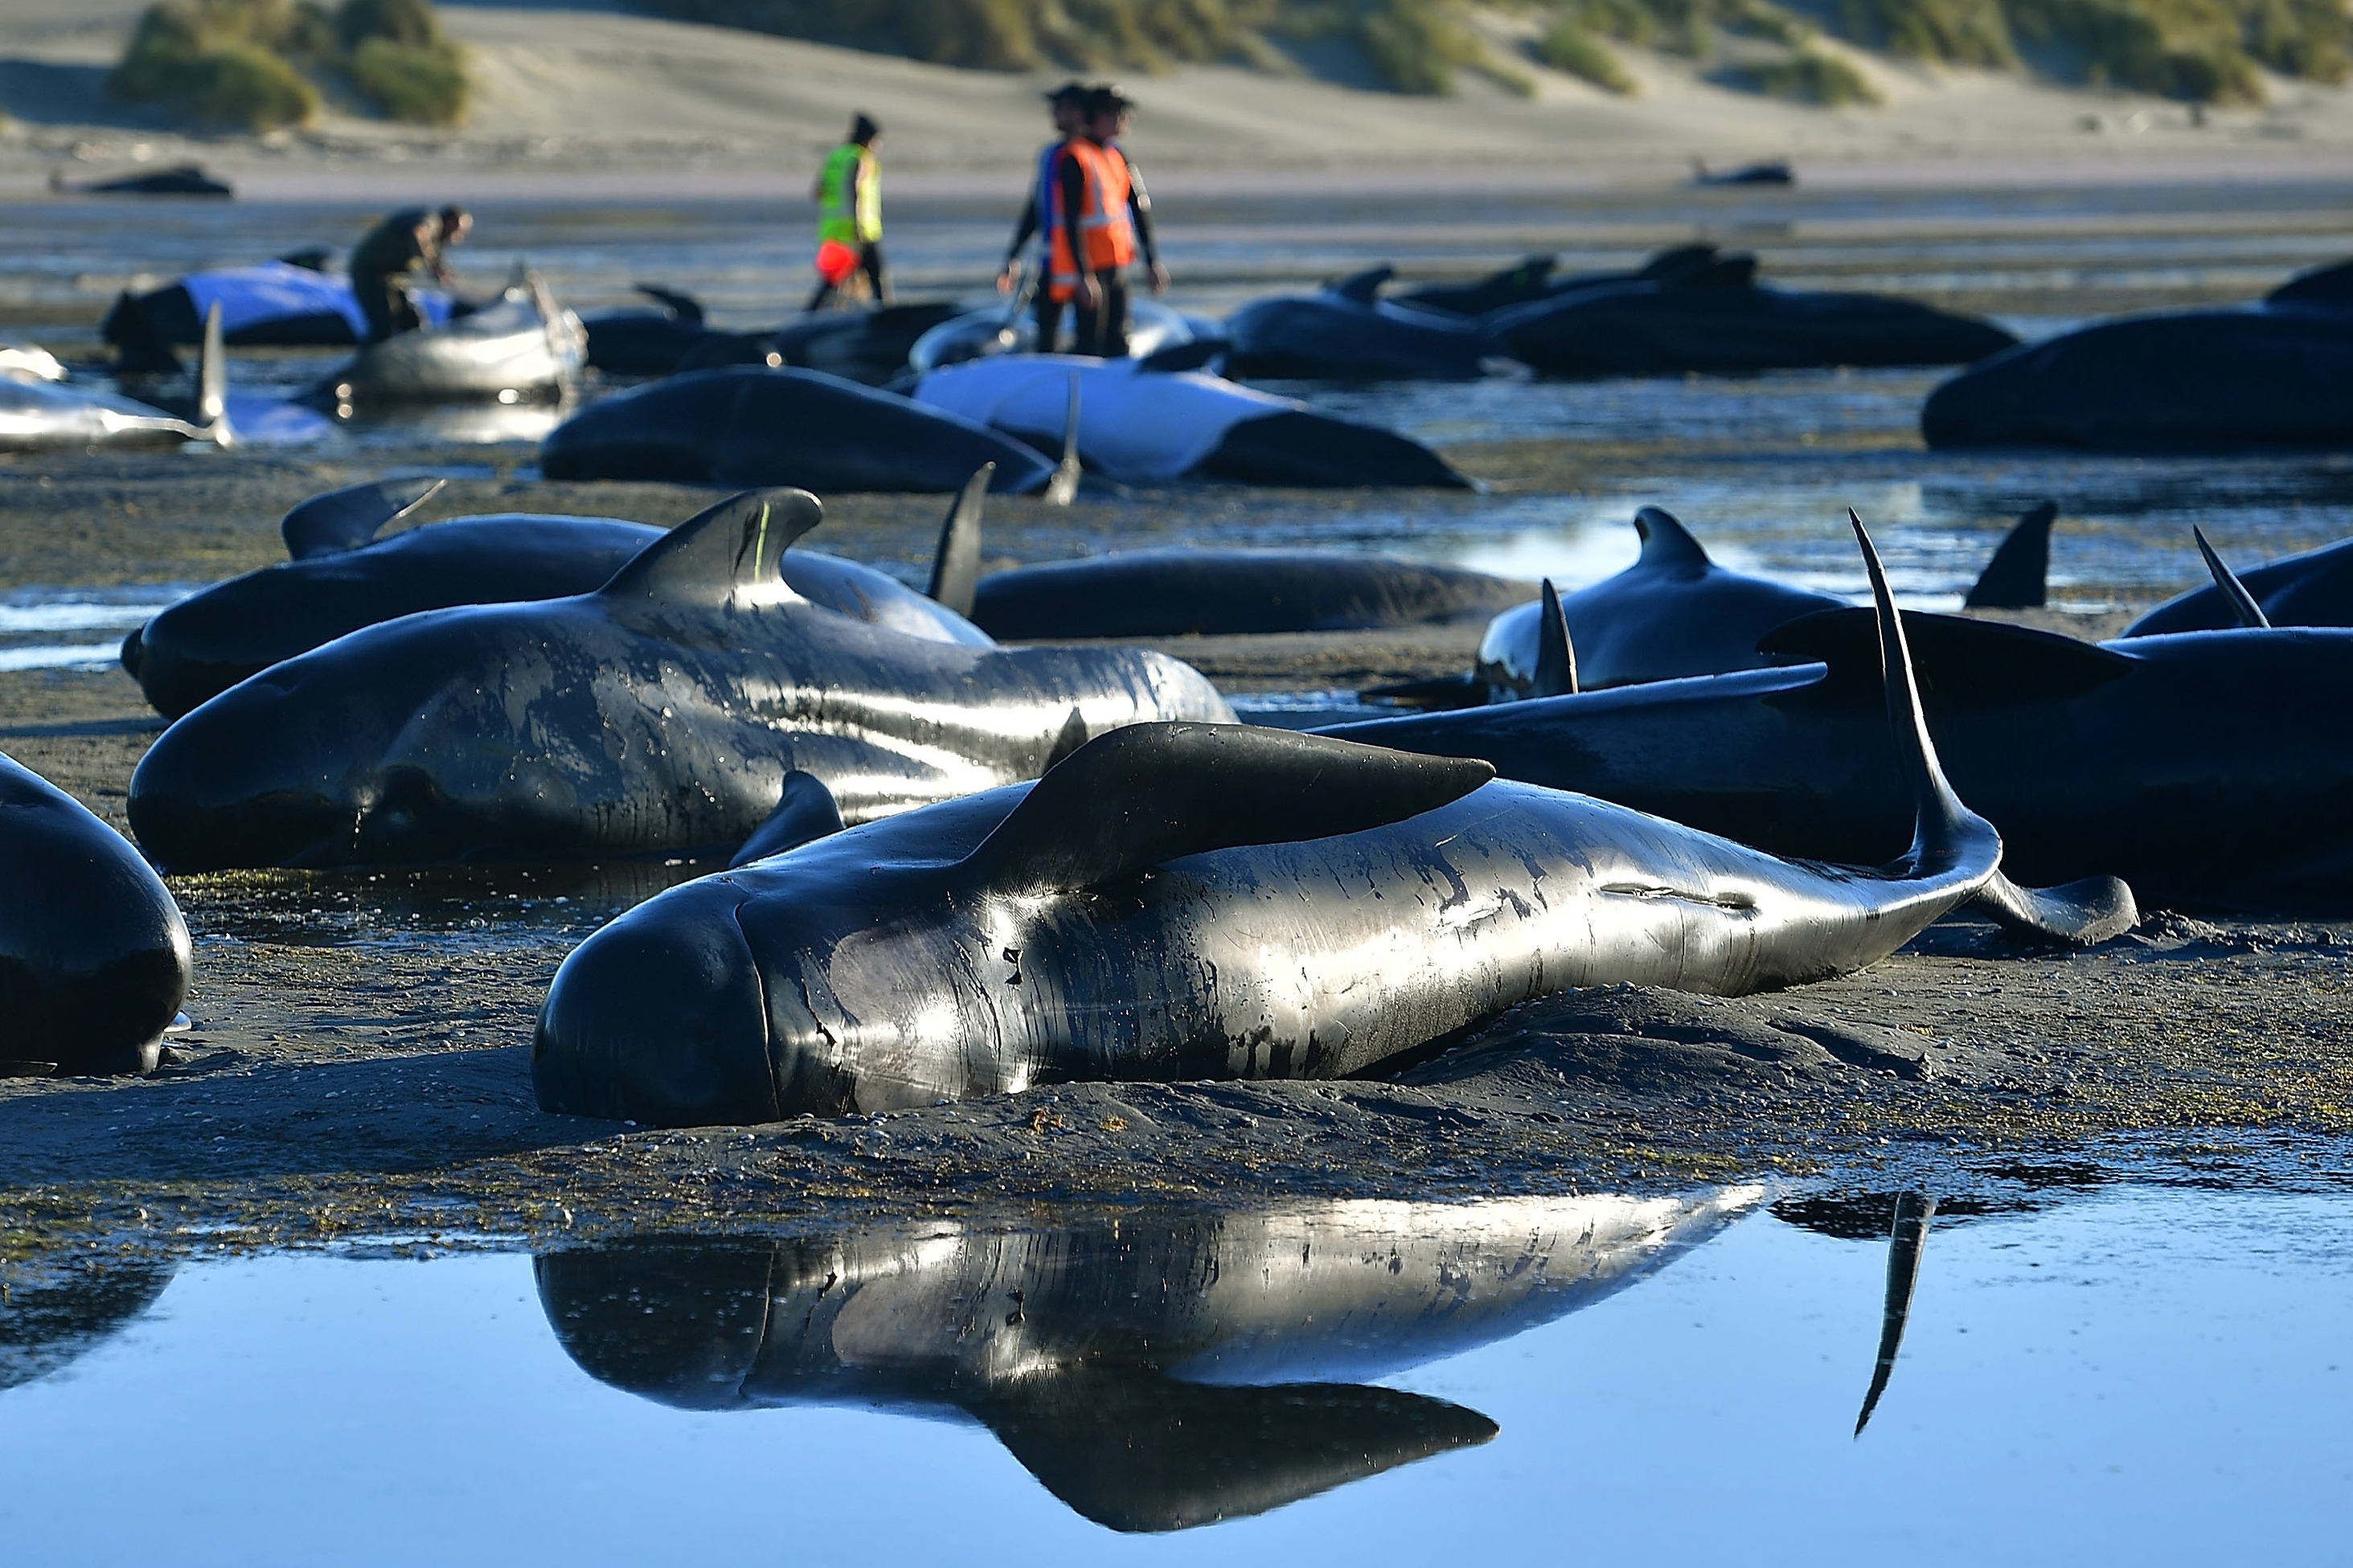 477 pilot whales die, beached on remote New Zealand beaches